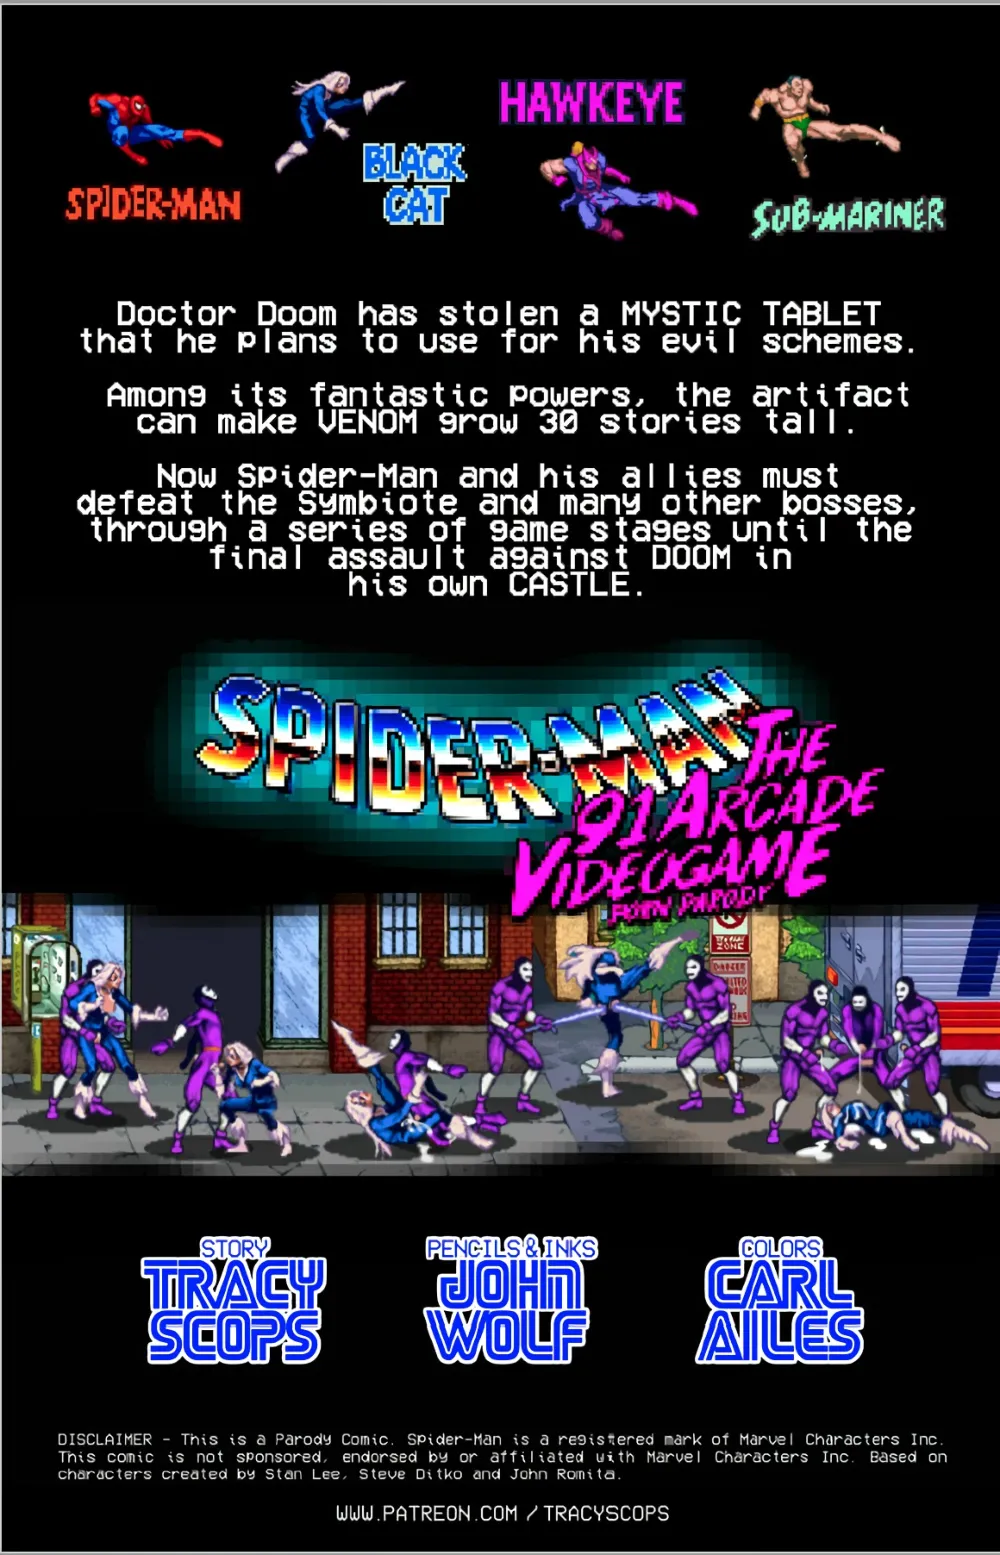 Spider-Man the '91 Arcade Video Game - Page 2